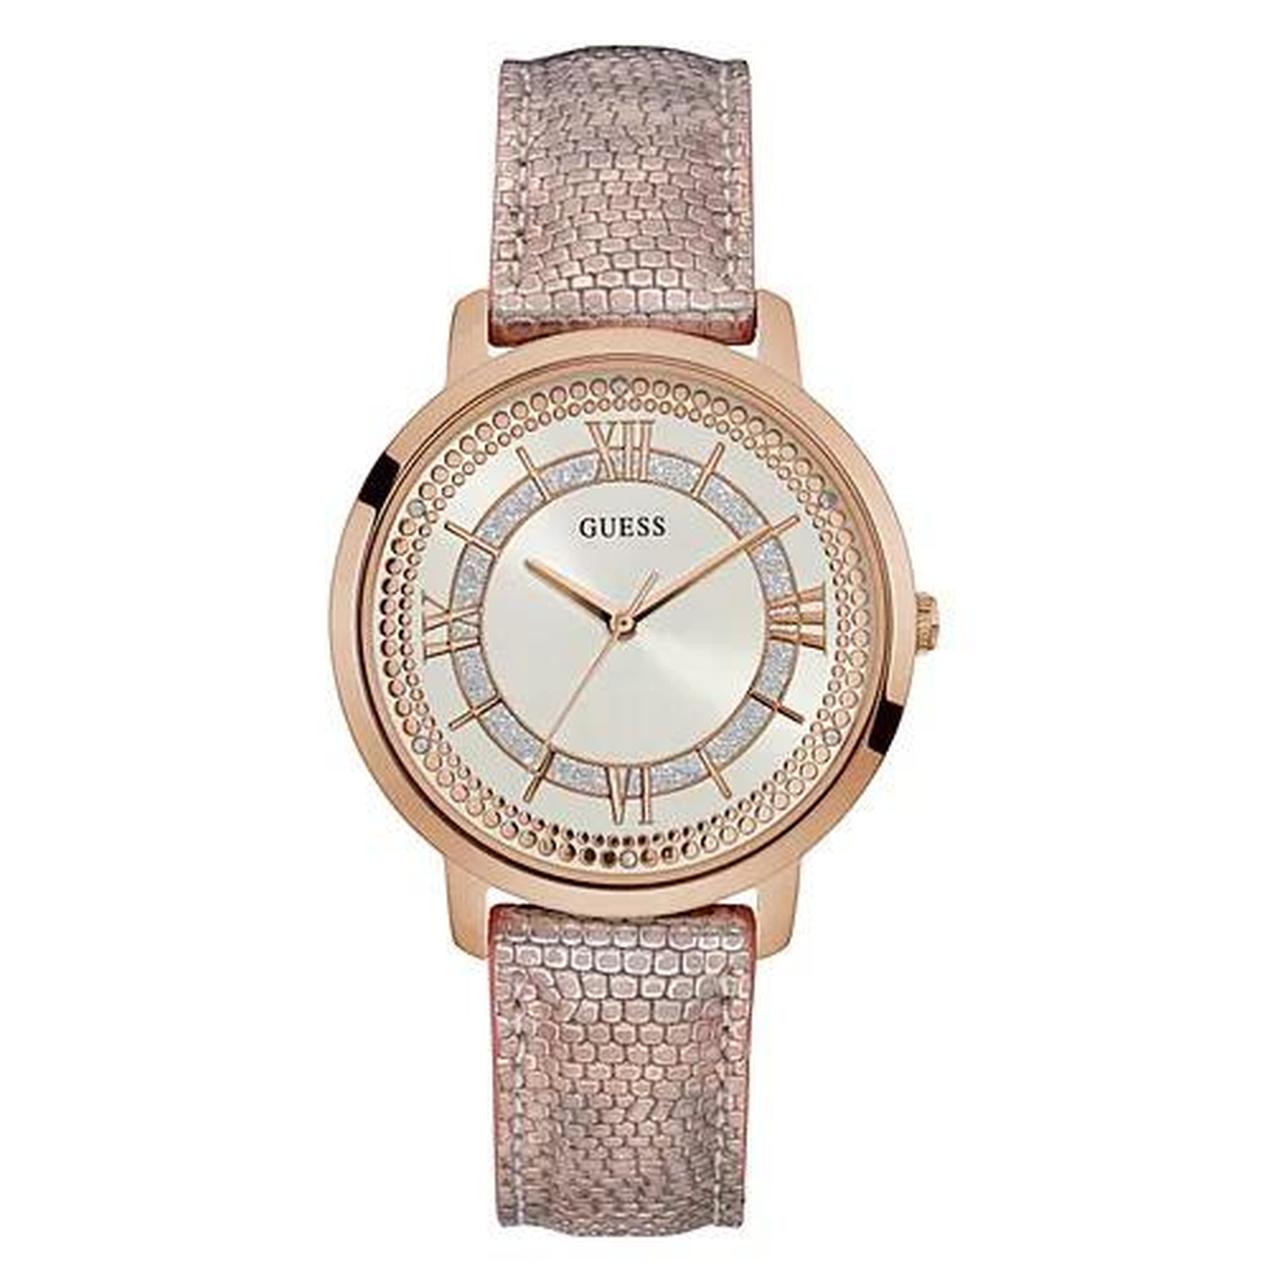 Guess Women's Silver and Gold Watch